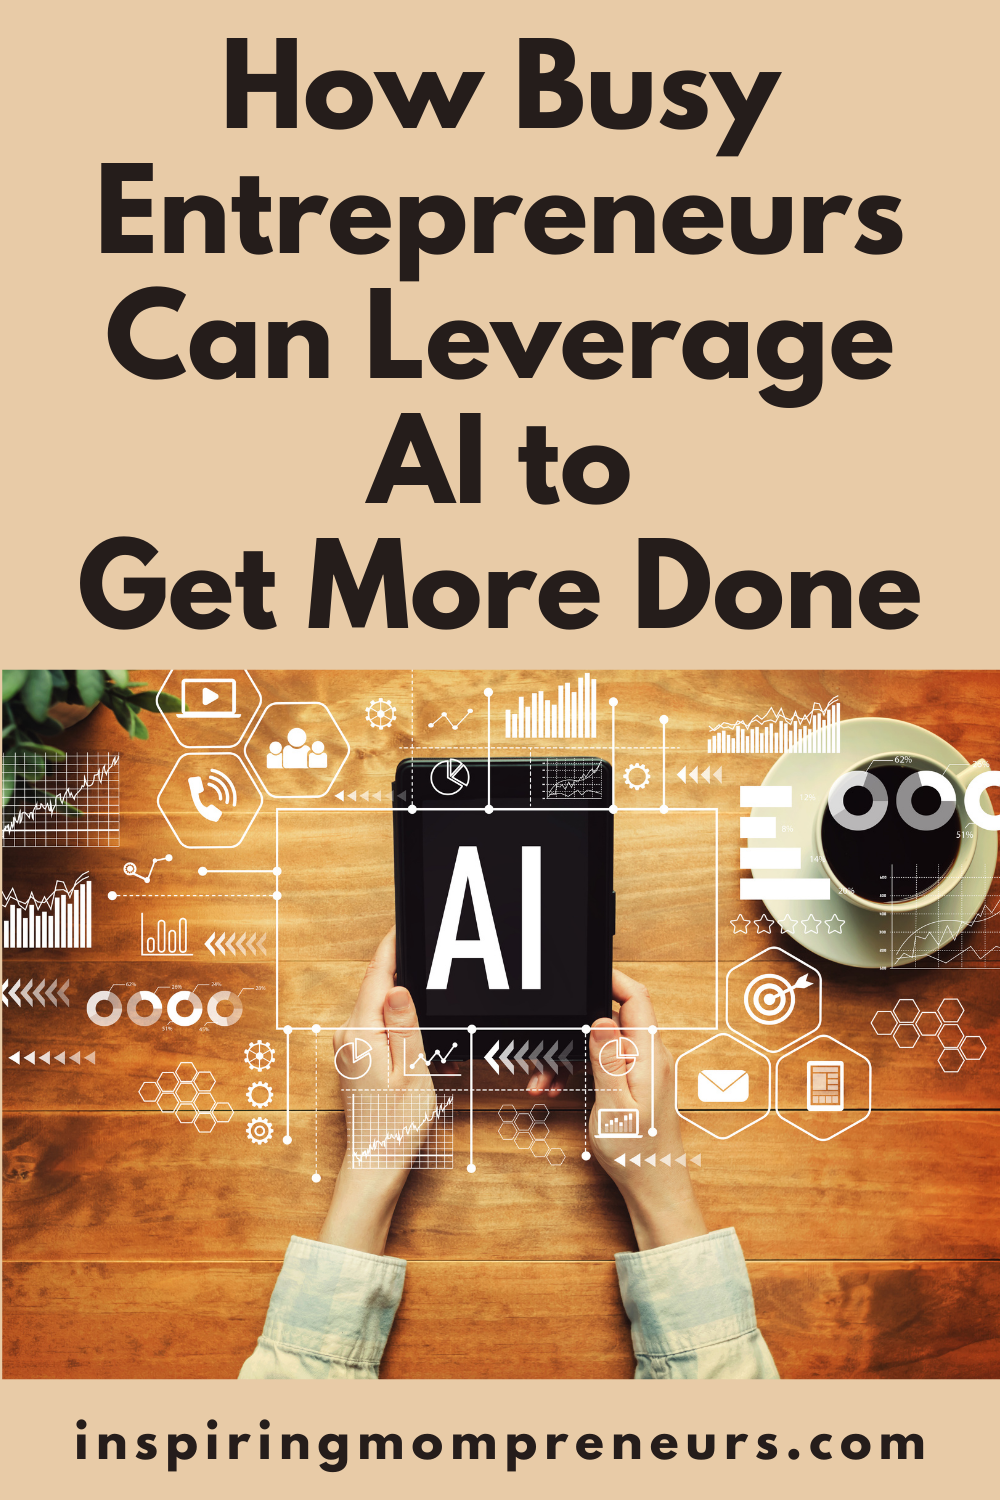 There are many ways technology can help improve your life as an entrepreneur at a low cost. Here is how busy entrepreneurs can leverage AI to get more done.